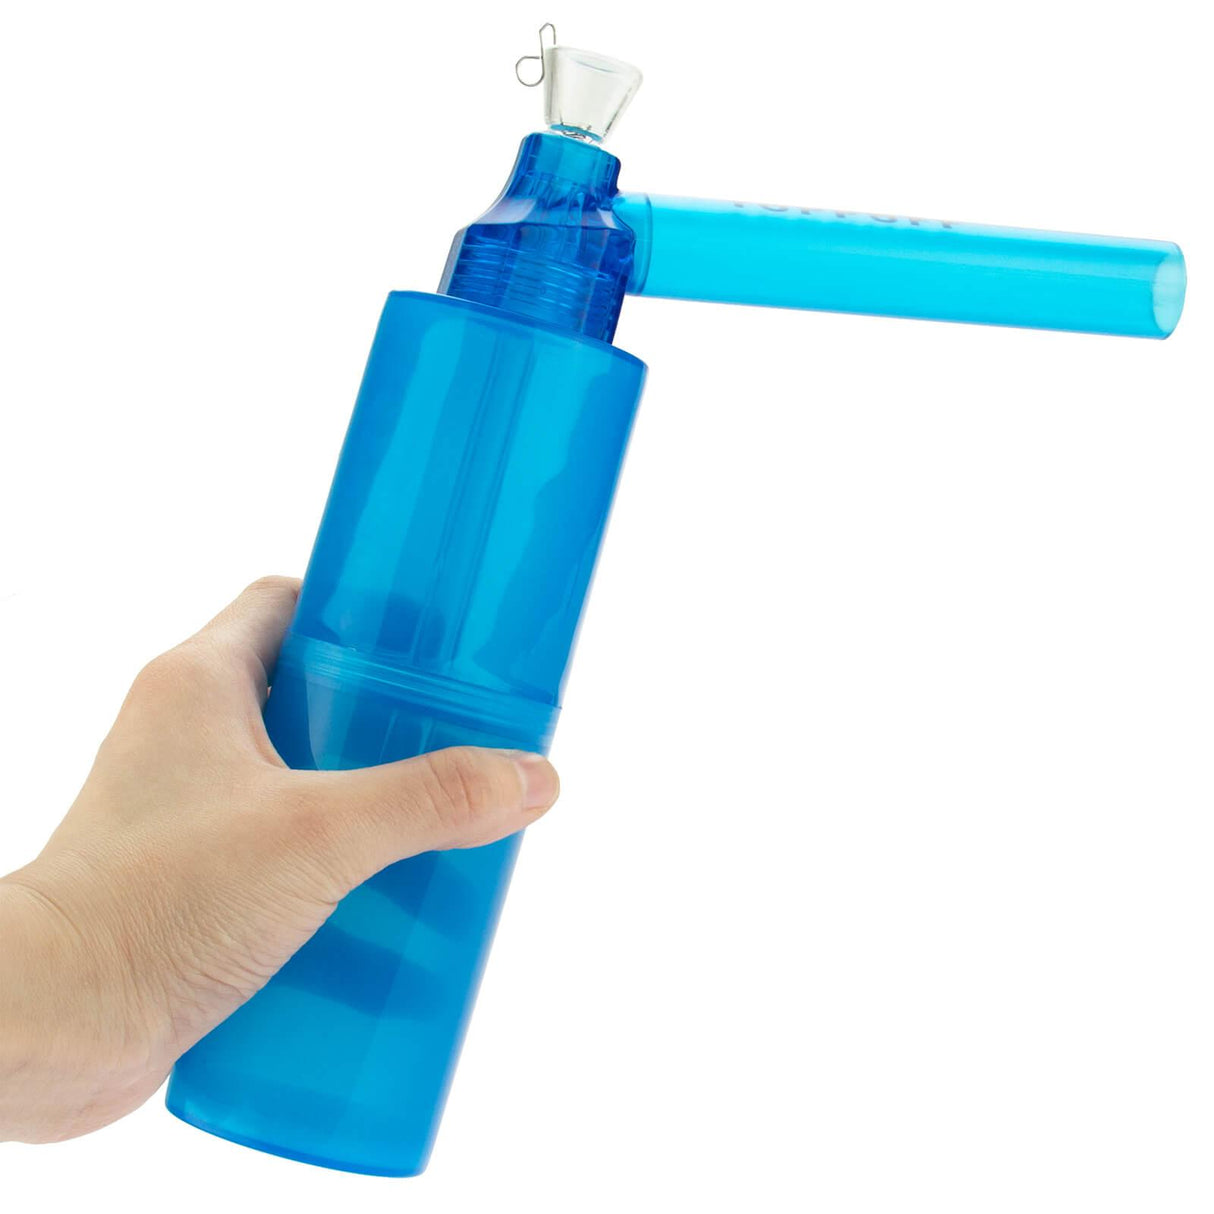 PILOT DIARY Portable Toppuff Water Bottle Pipe Kit in Hand - Blue, Travel-Friendly